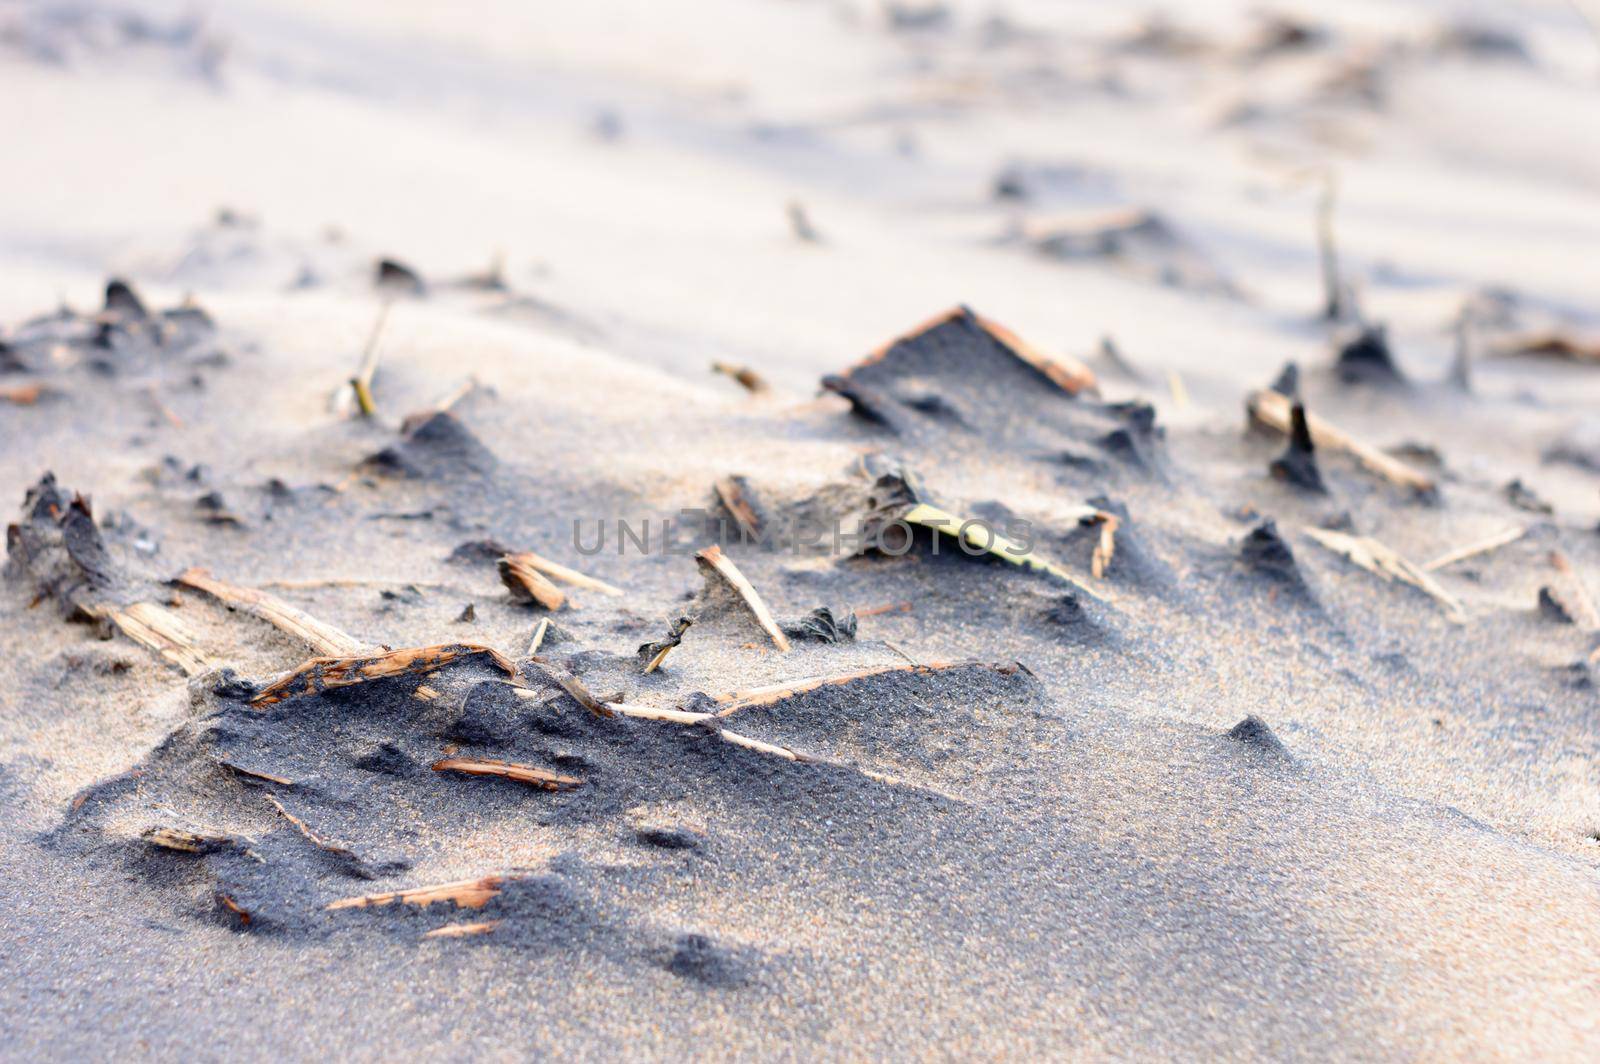 Dead plants in sand sea beach in sunset sunlight. Branches of dry dead plants in sandy coastal area. Nature background. Selective focus. Puri India. by sudiptabhowmick